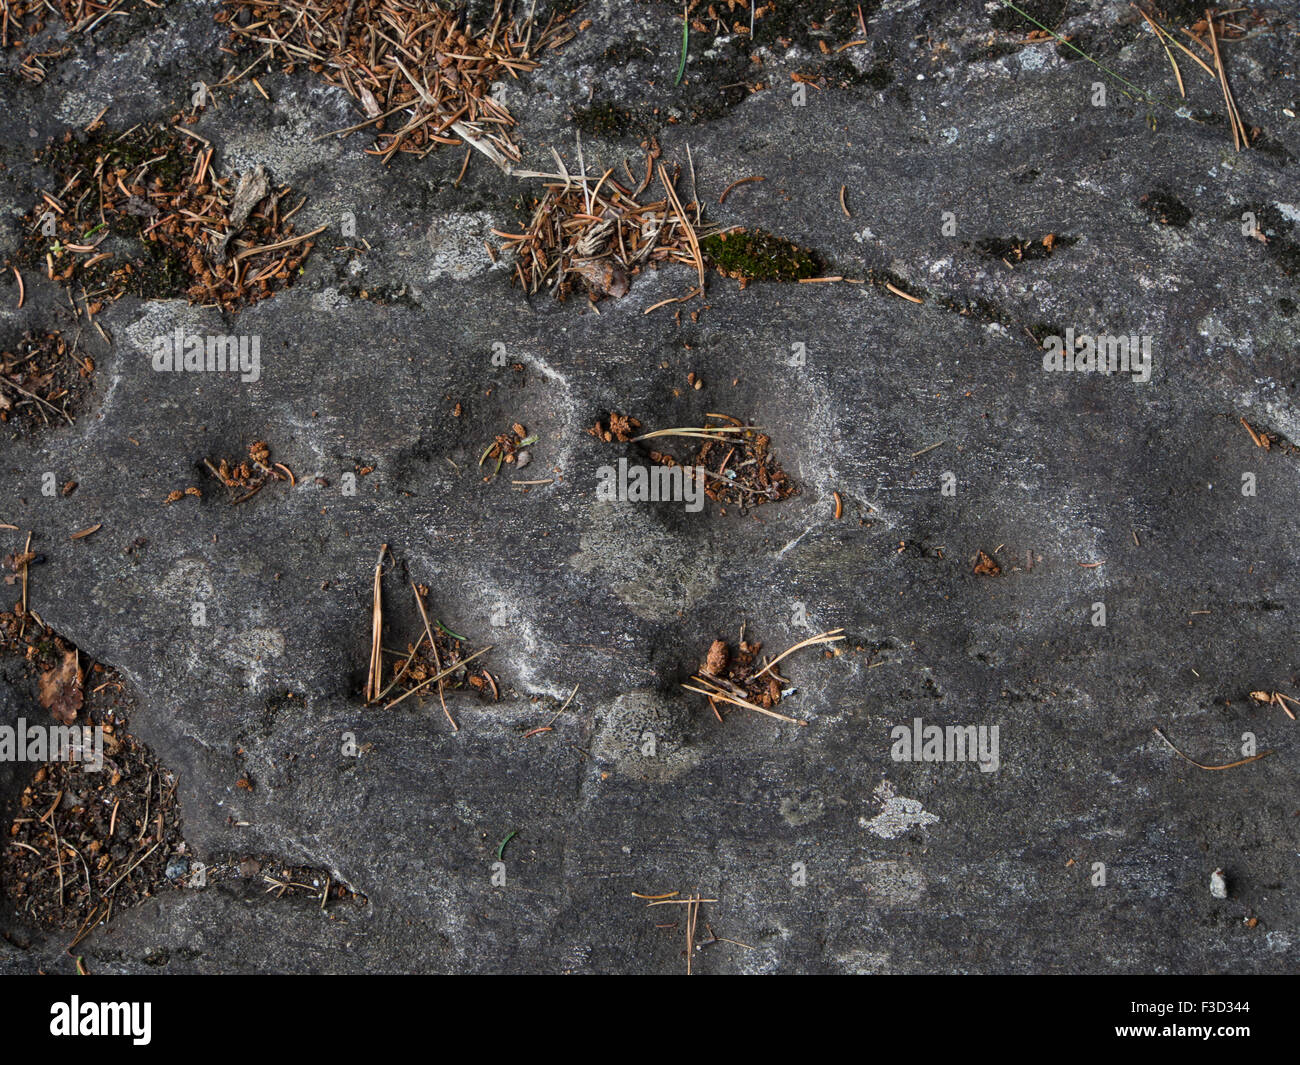 Cup marks, rock carvings, a prehistoric art form in many countries in Europe, here from Ekebergparken Oslo Norway Stock Photo